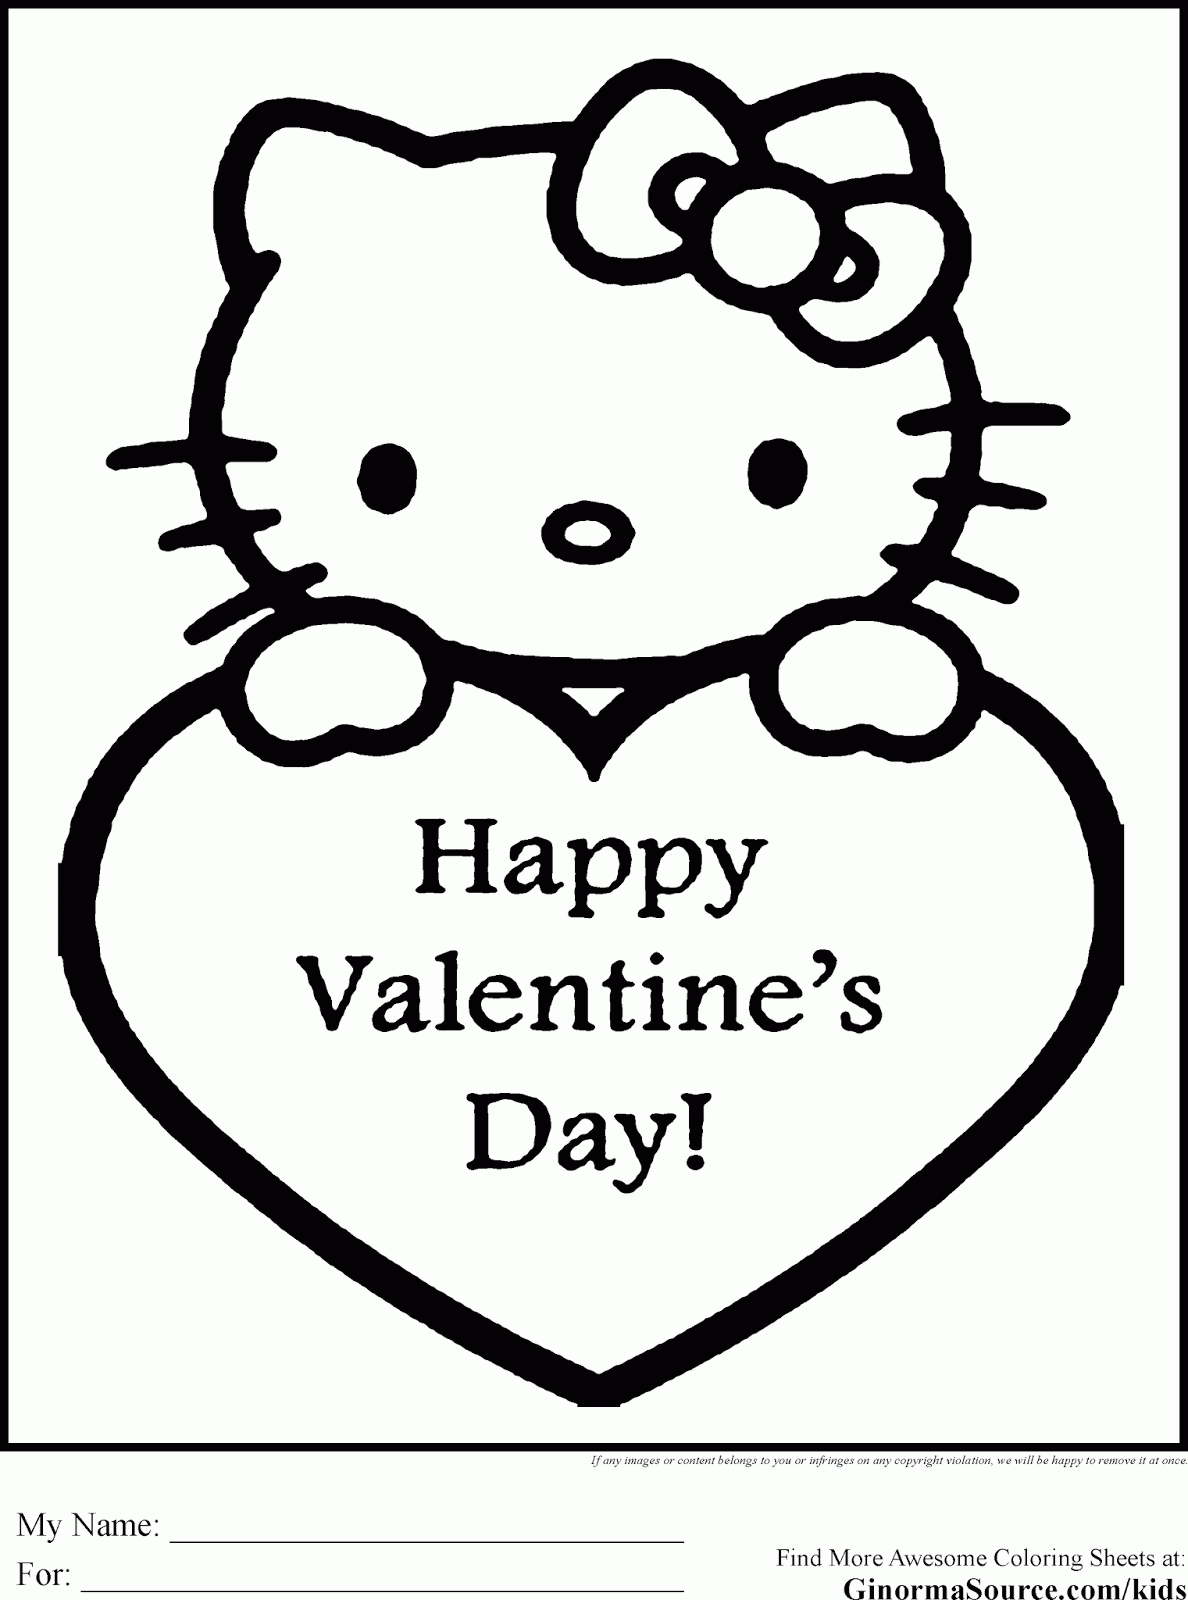 20 Valentine's Day Coloring Pages Free Printable   Coloring Home